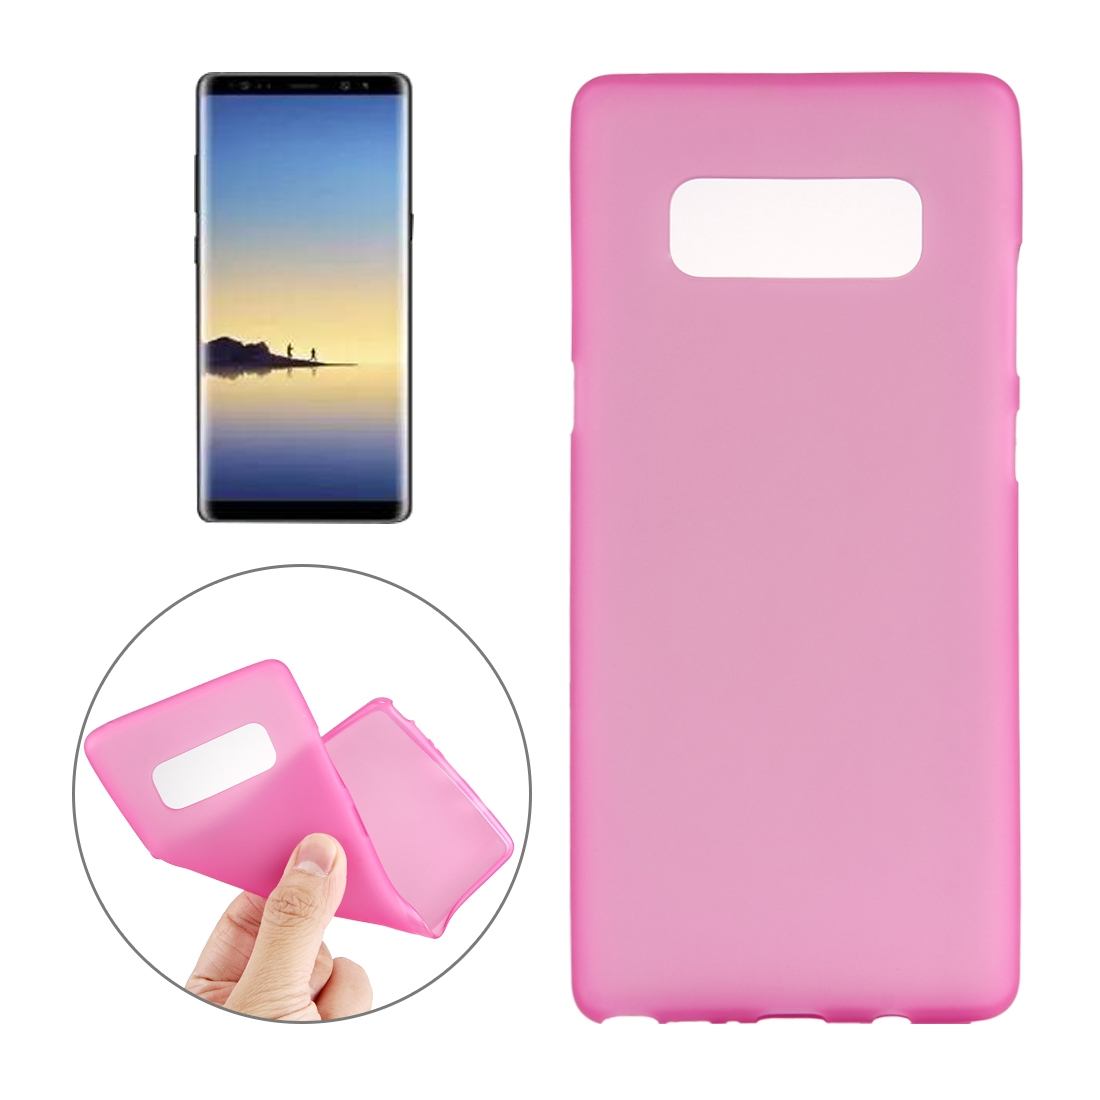 For Samsung Galaxy Note 8 Back Case,Stylish High-Quality Protective Cover,Pink